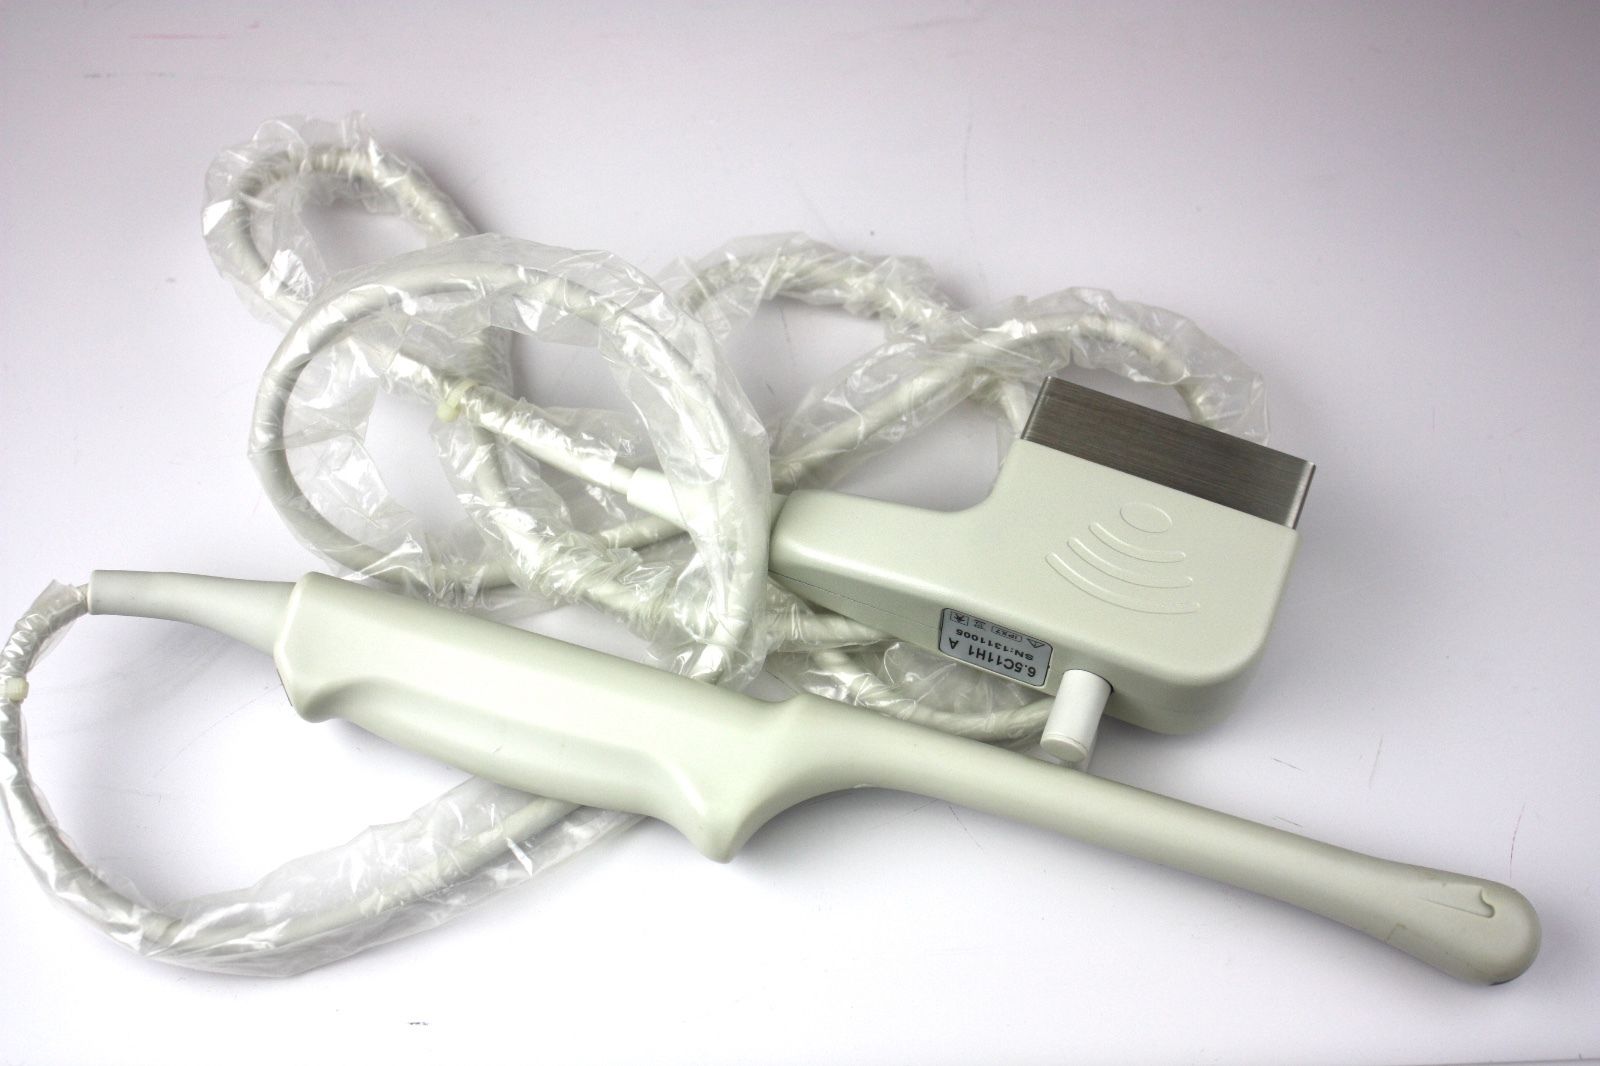 6.5C11H1A Transvaginal  Probe, 6.5MHz, For Kaixin DCU-12 Ultrasounds DIAGNOSTIC ULTRASOUND MACHINES FOR SALE